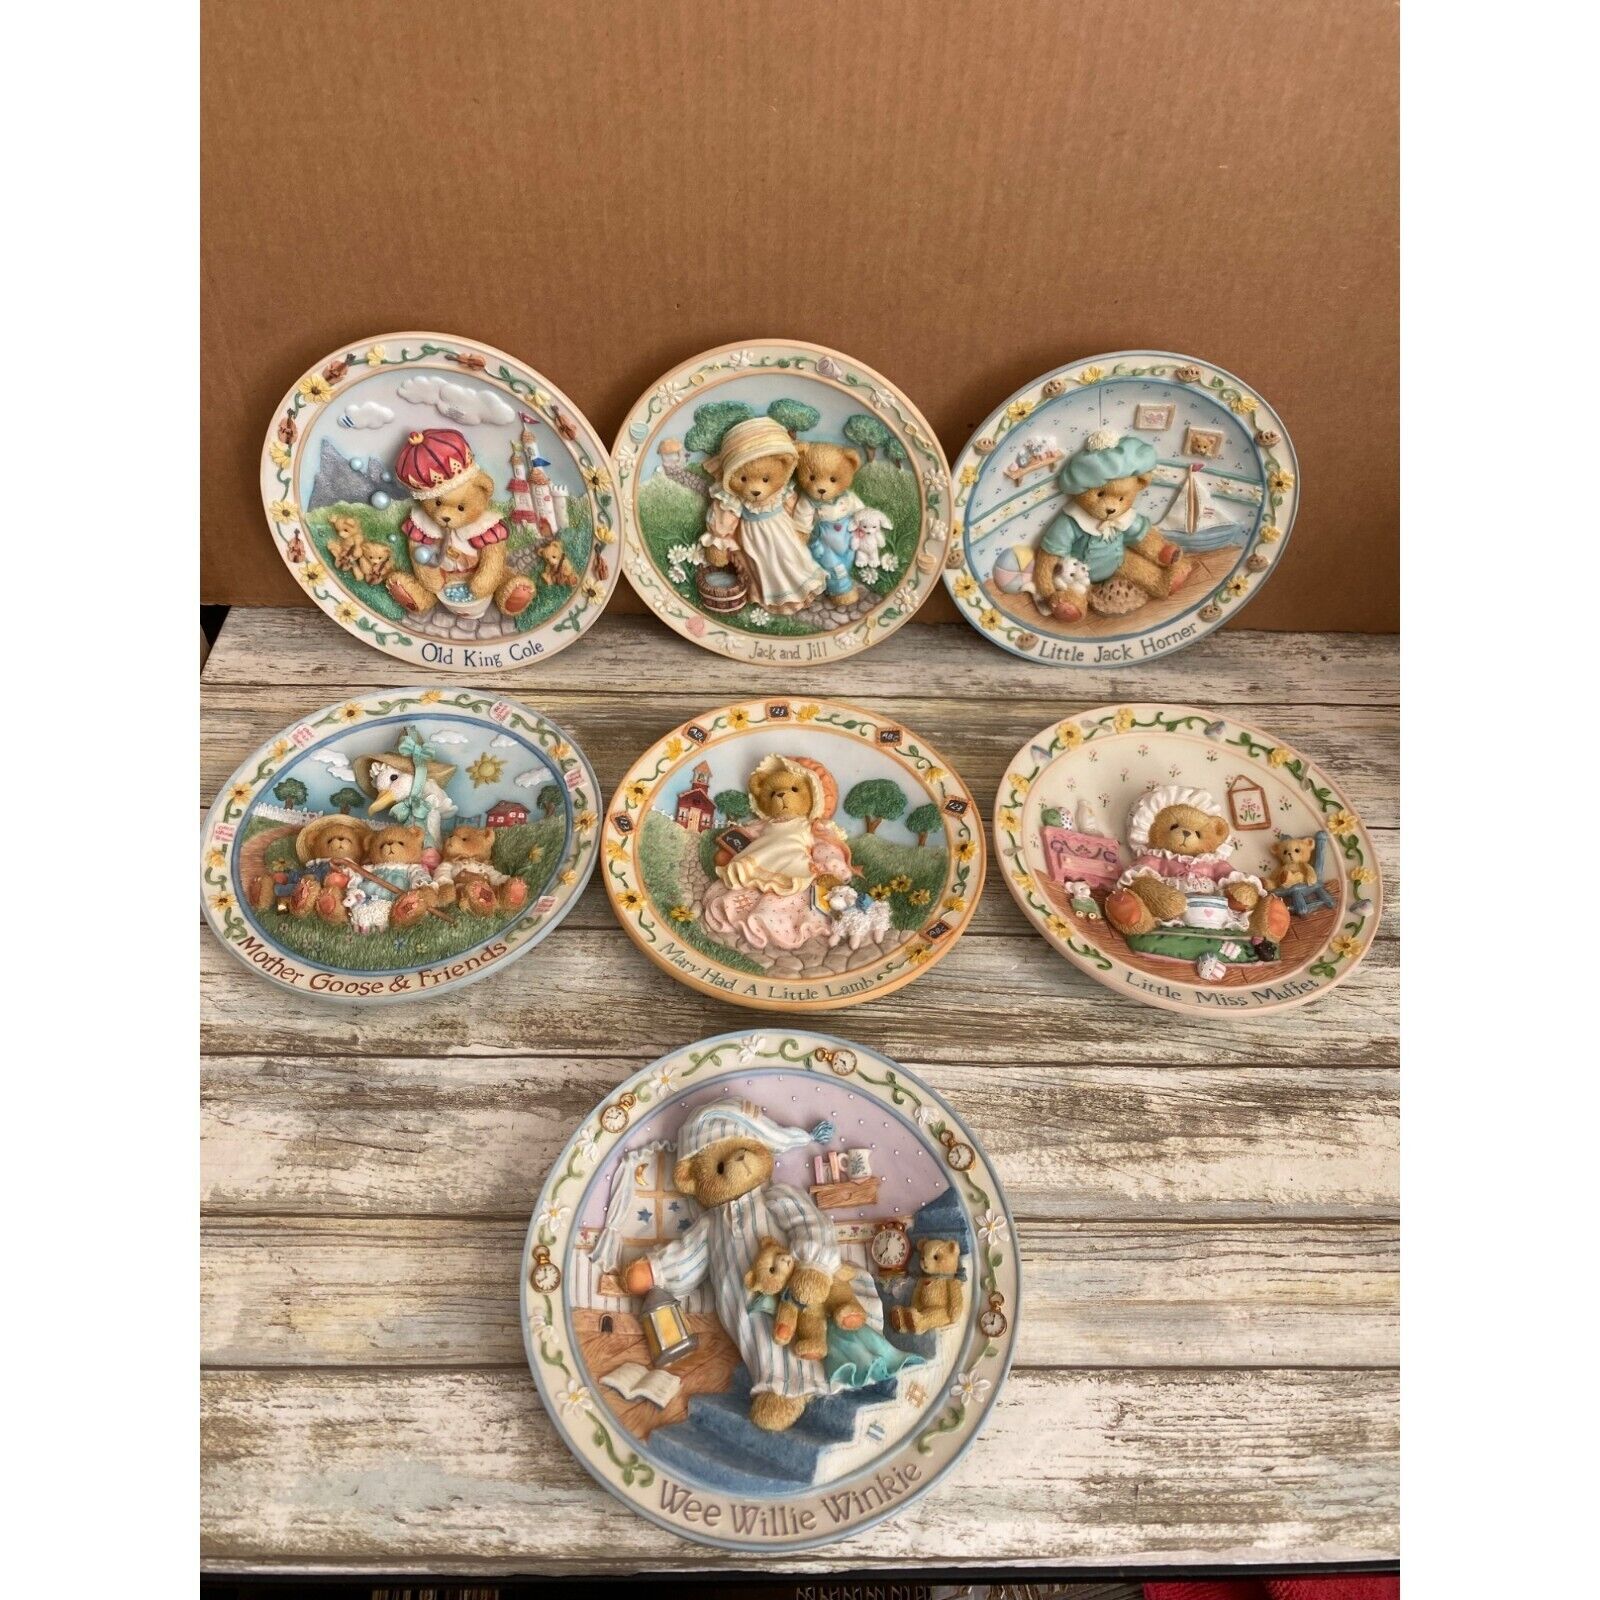 Vintage 1990s Cherished Teddies Nursery Rhymes Plate Collection Lot of 7